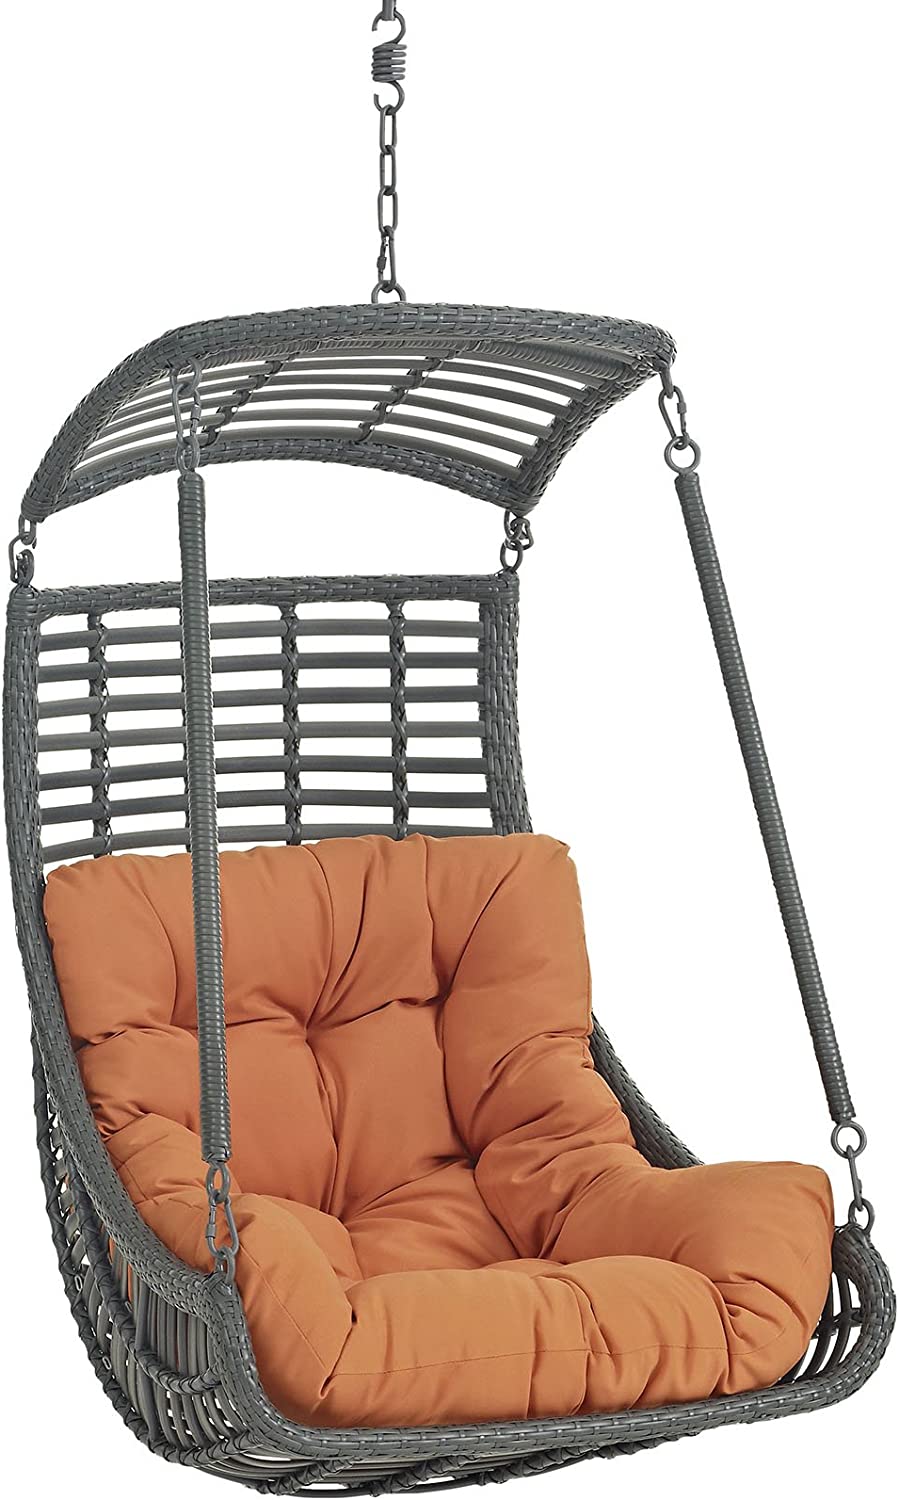 Modway EEI-2655-ORA-SET Jungle Outdoor Patio Porch Lounge with Hanging Steel Chain, Swing Chair Without Stand, Orange